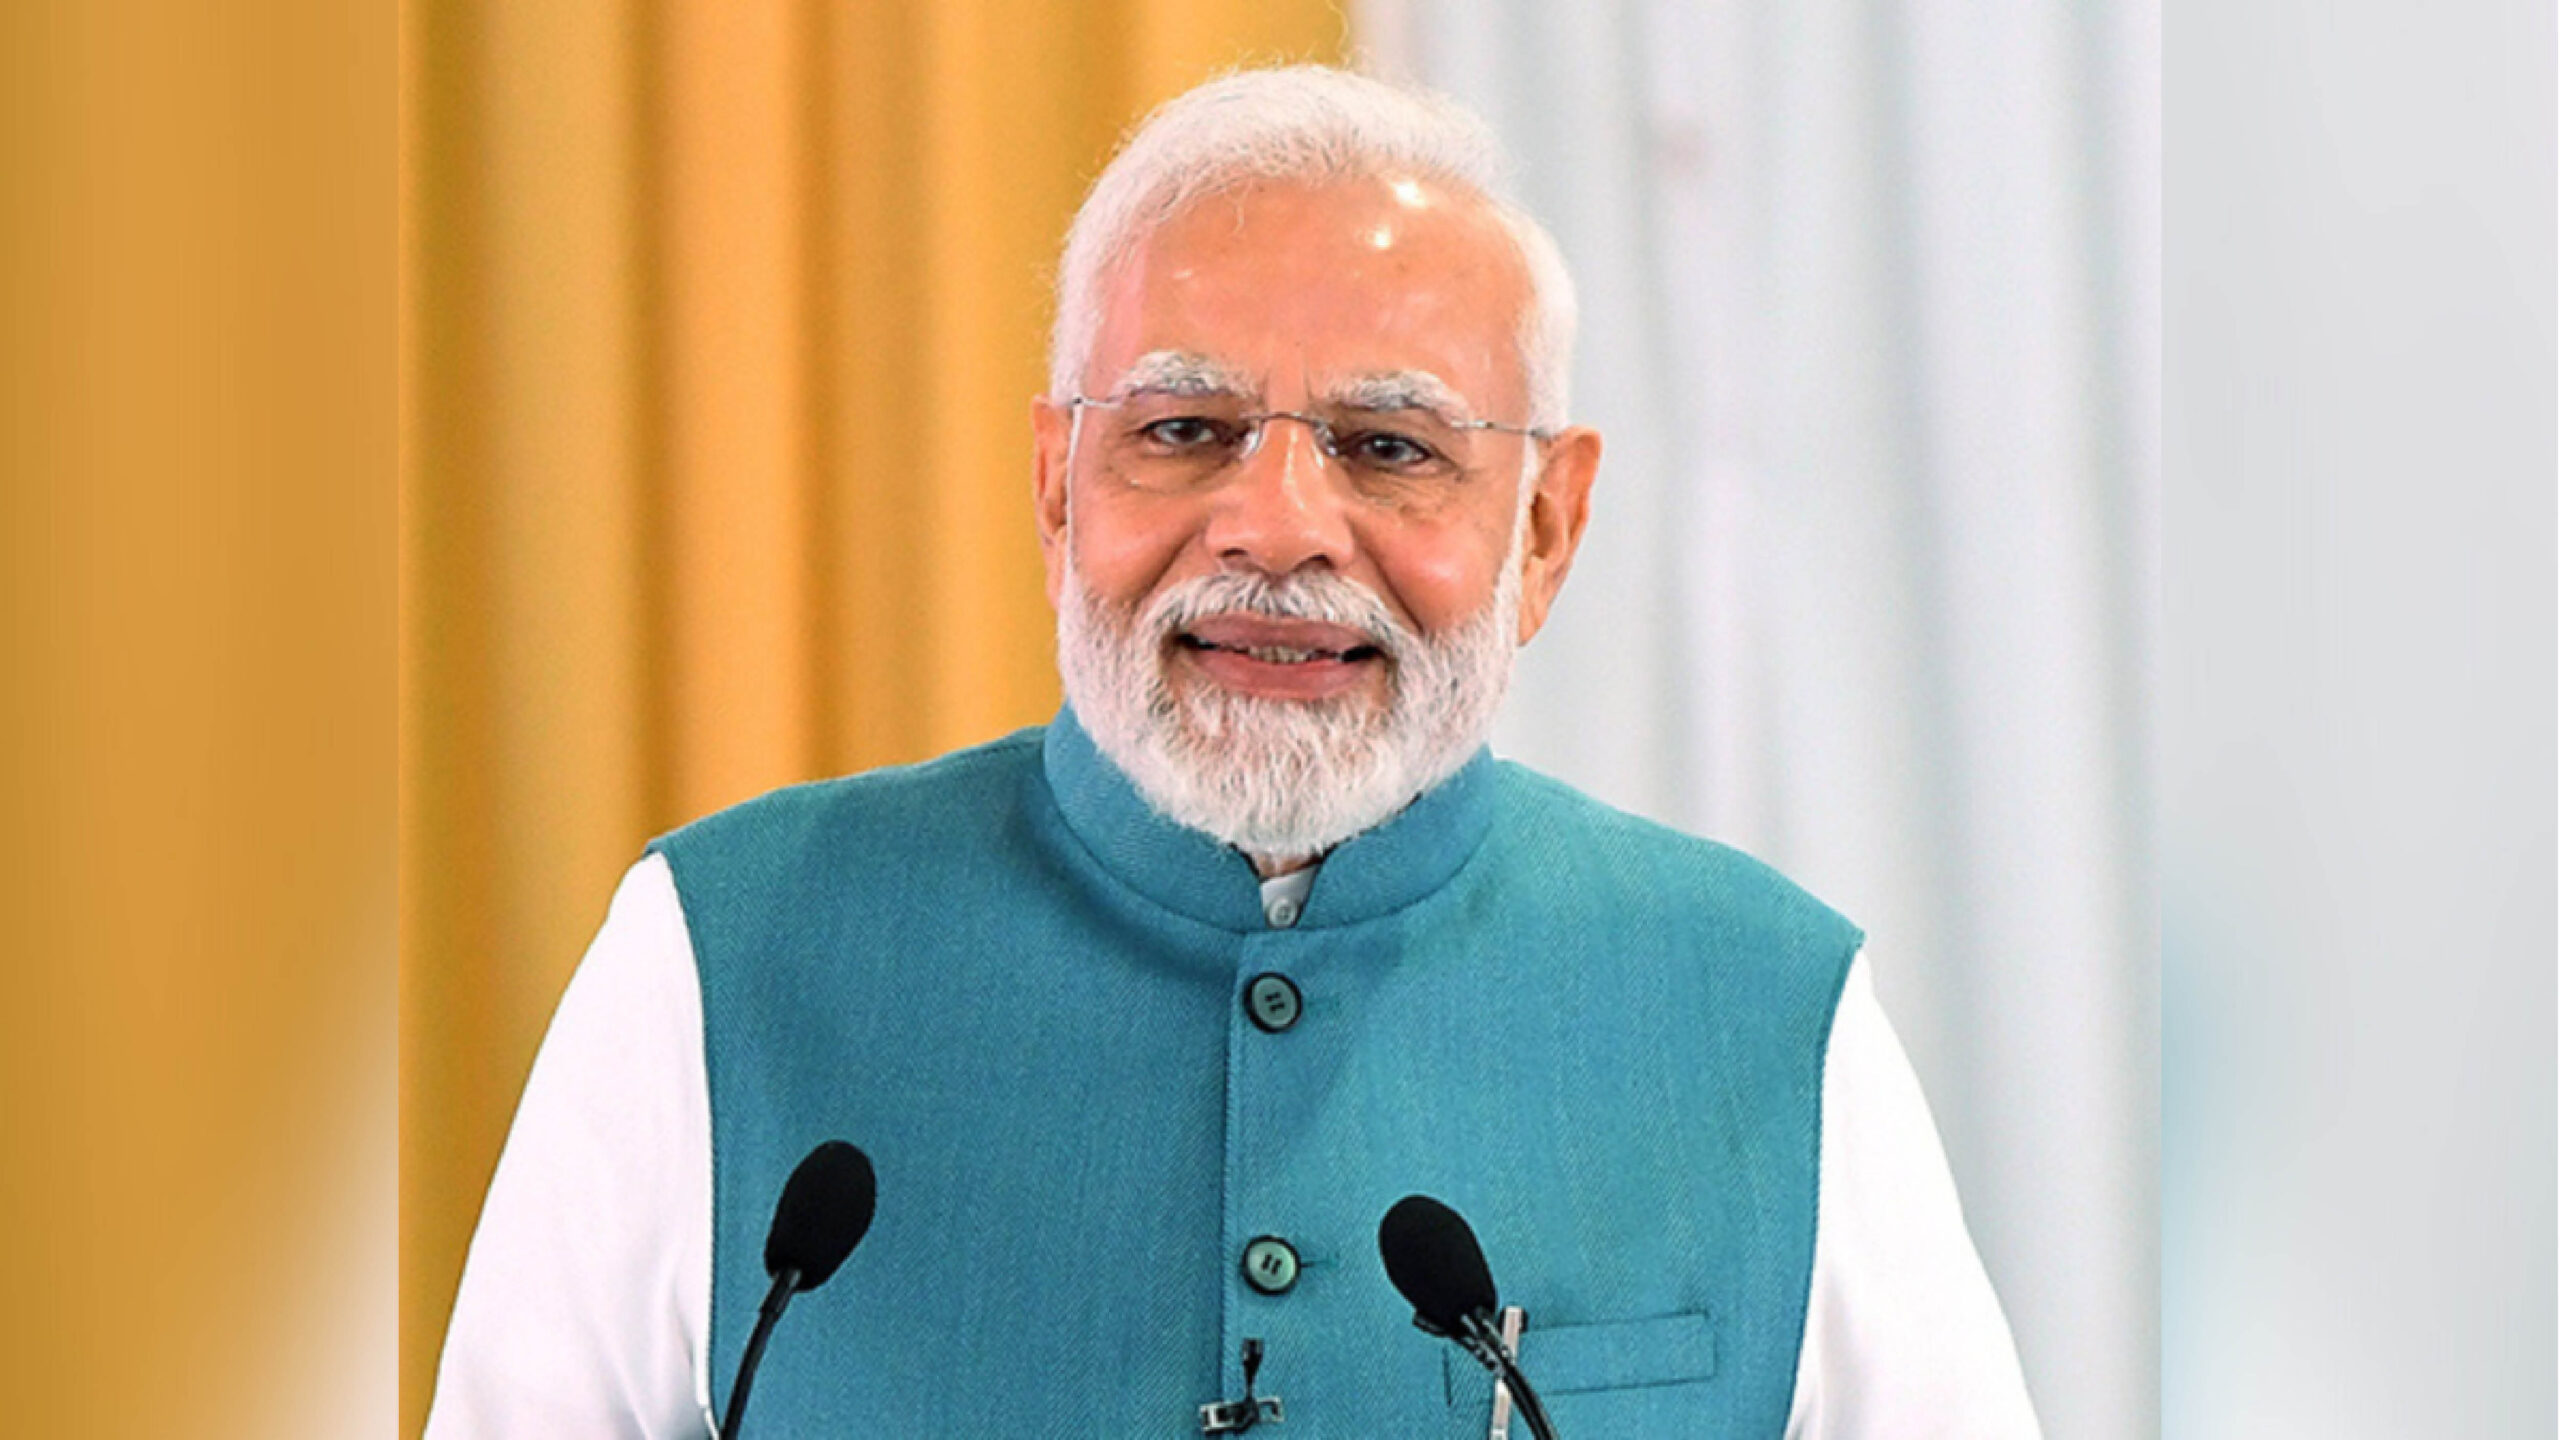 PM Modi’s Stern warning signals crackdown on Fraudulent activities